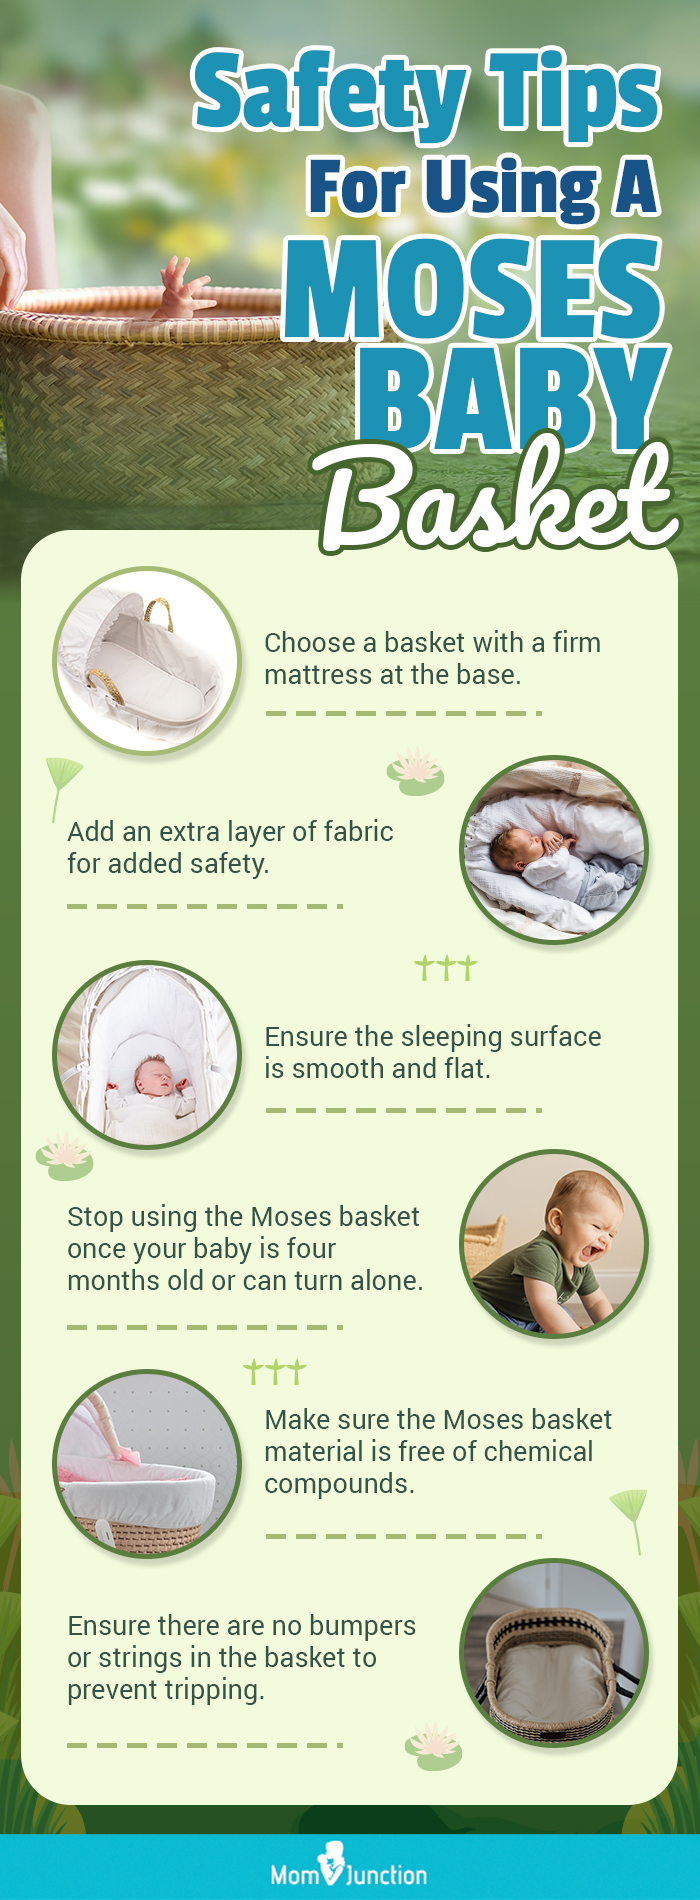 Safety-Tips-For-Using-A-Moses-Baby-Basket (infographic)